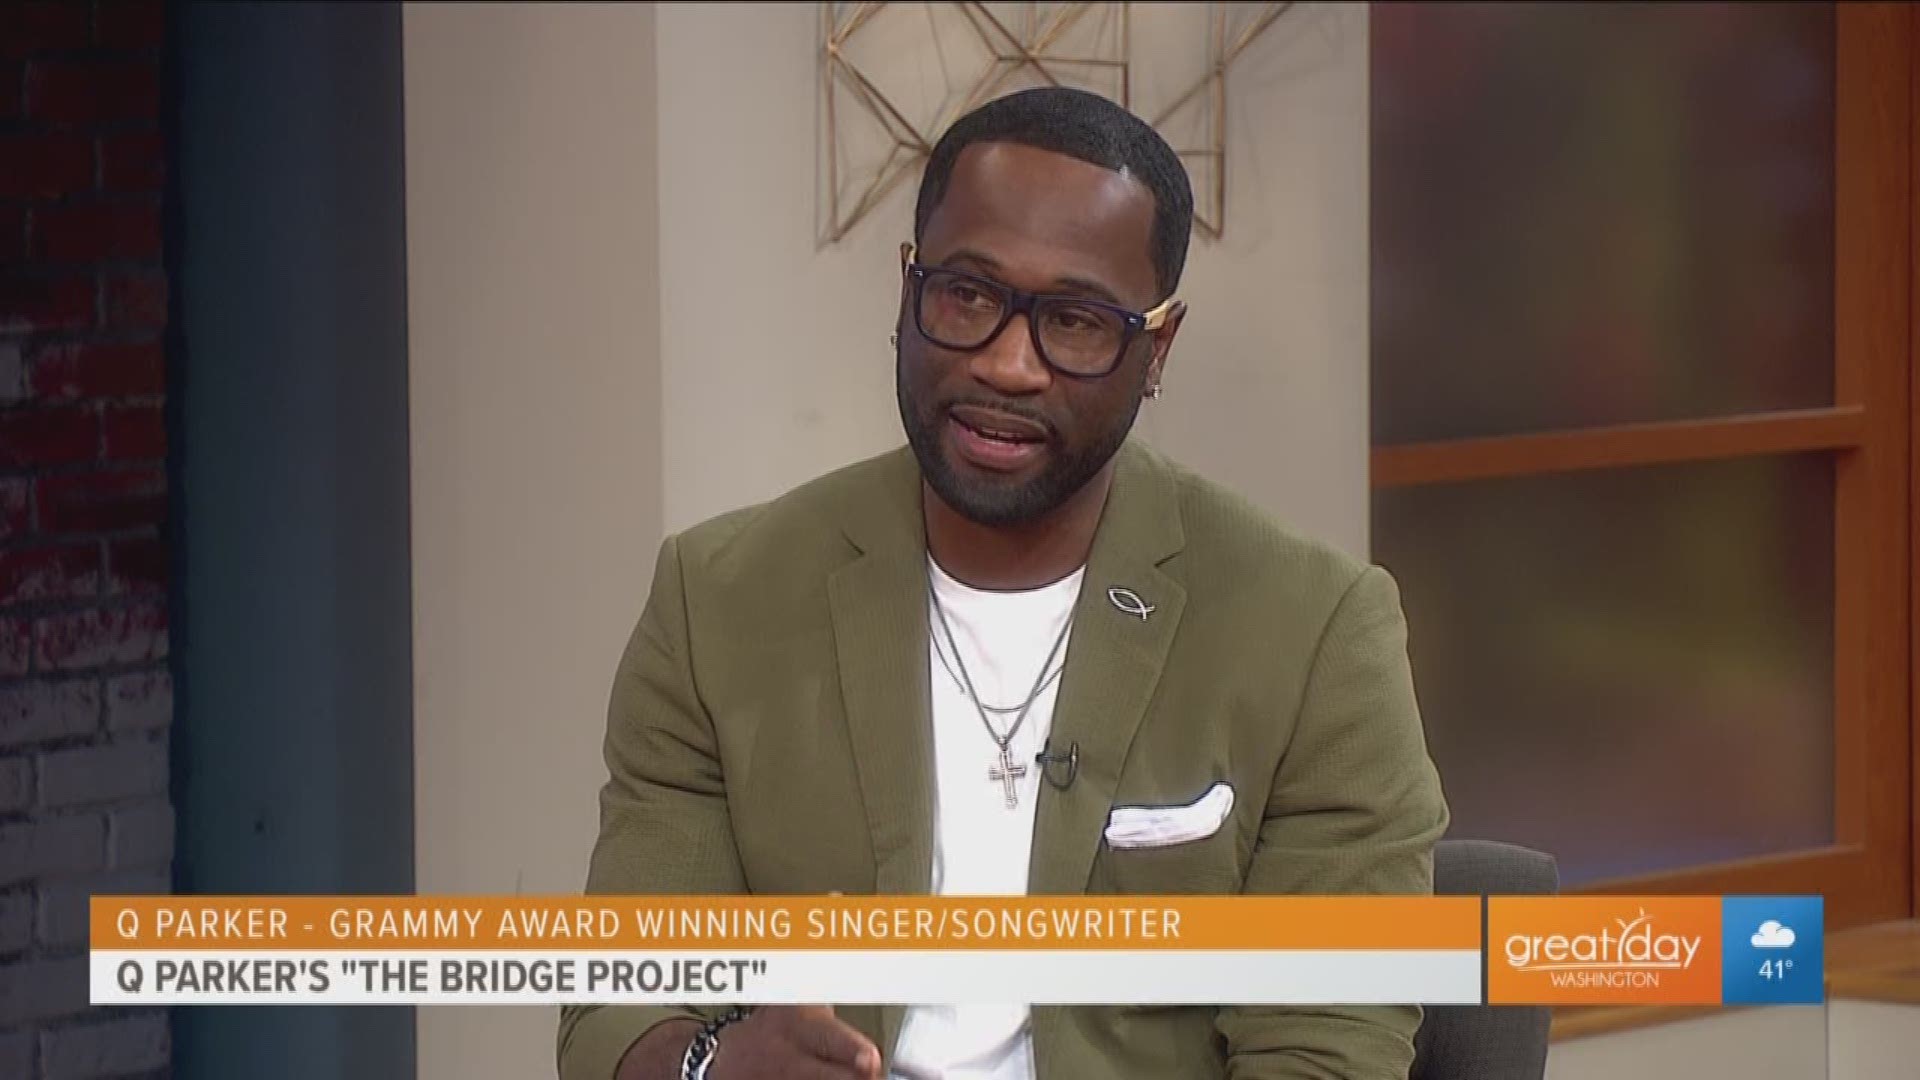 The Grammy winning singer and songwriter talks about his new reflections on life, his new music, and the projects that aim to promote brotherhood and unity.